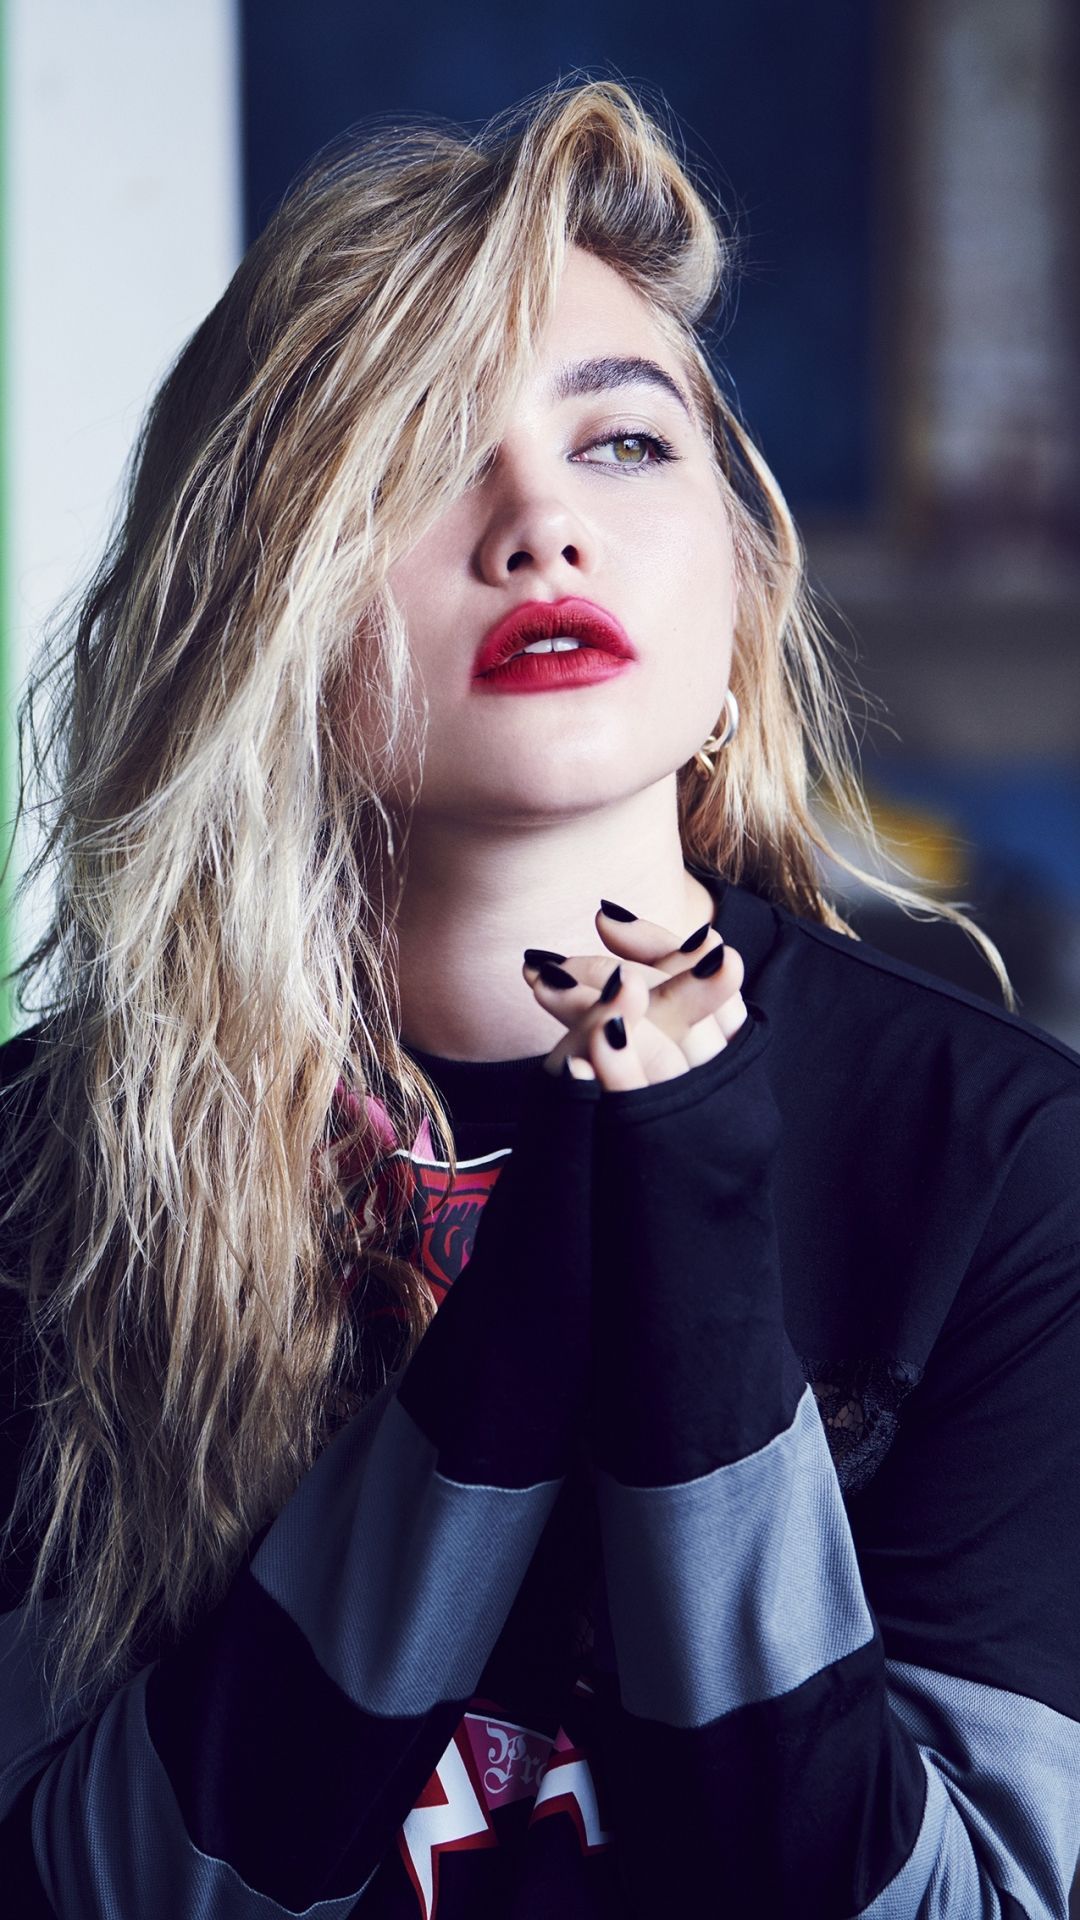 A woman with red lipstick and a black top. - Florence Pugh